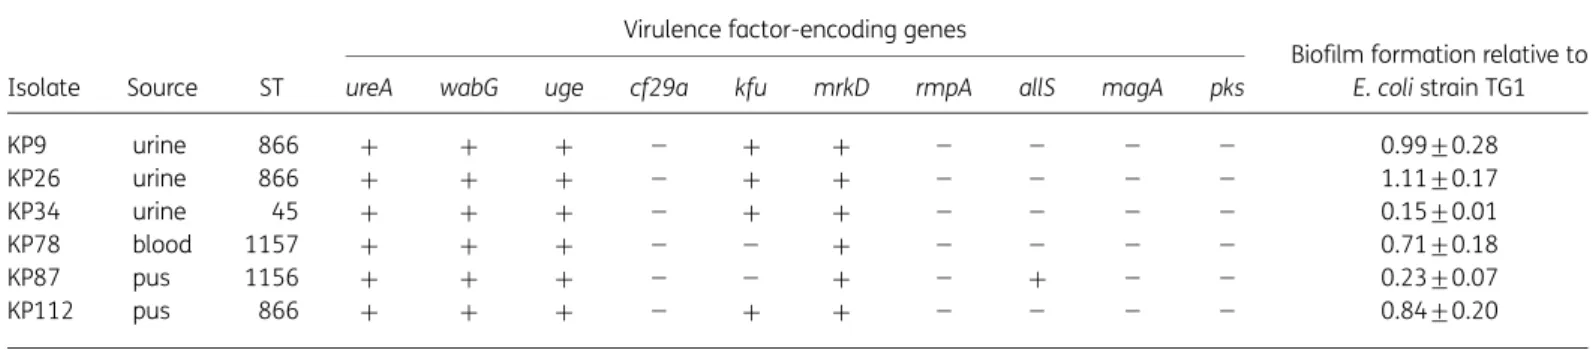 Table 2. STs, virulence factor-encoding genes and biofilm formation in OXA-48-producing K